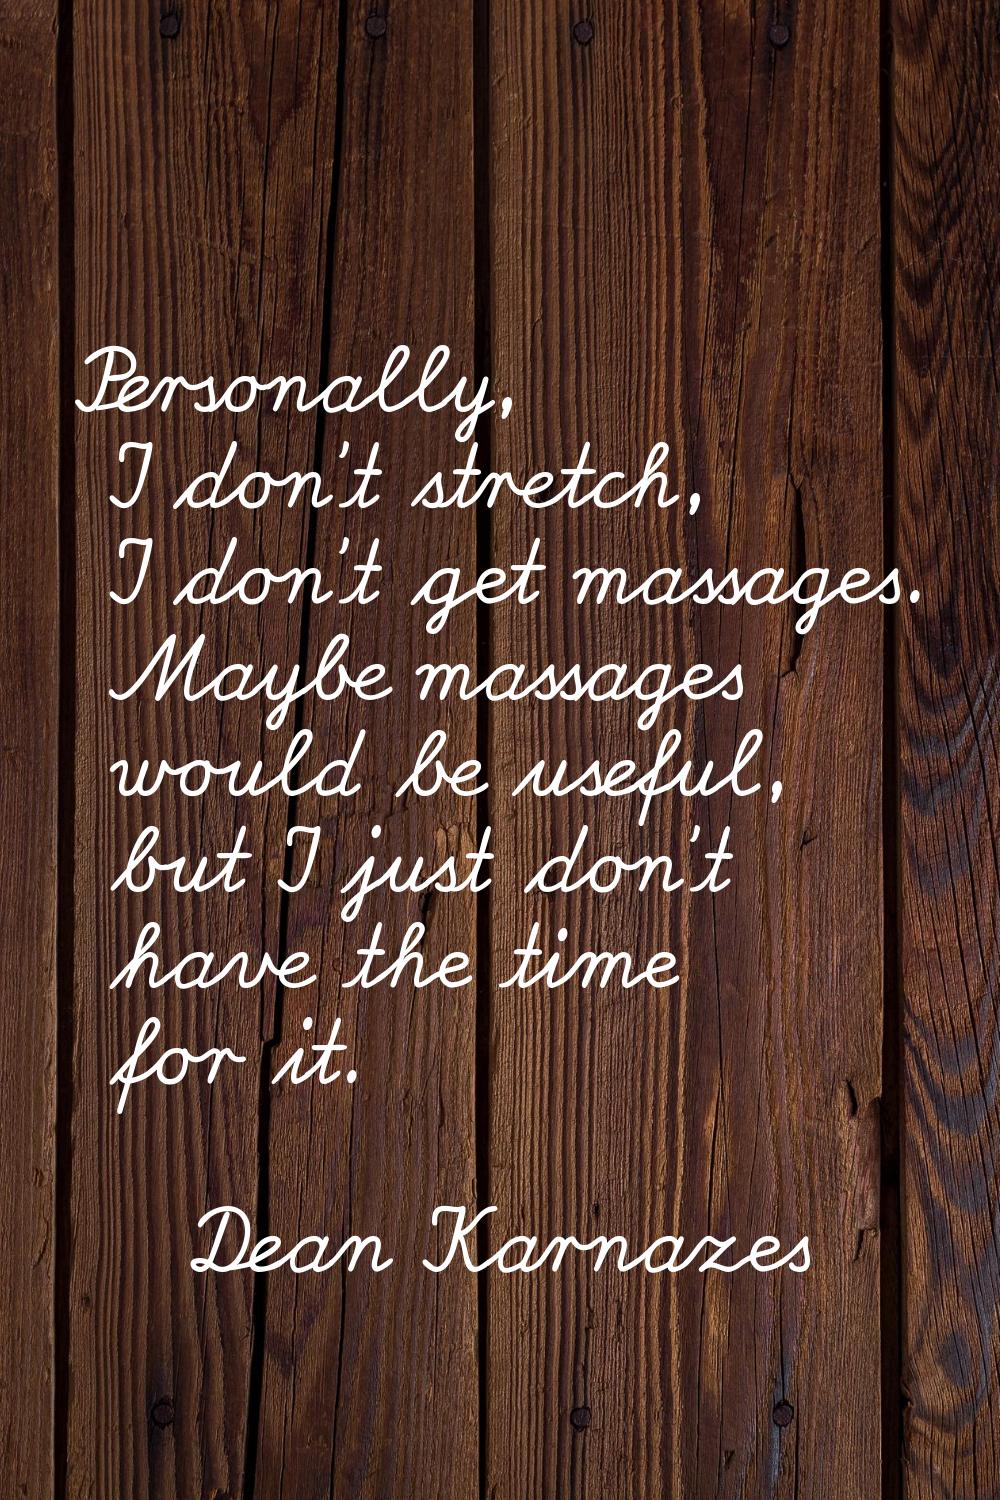 Personally, I don't stretch, I don't get massages. Maybe massages would be useful, but I just don't